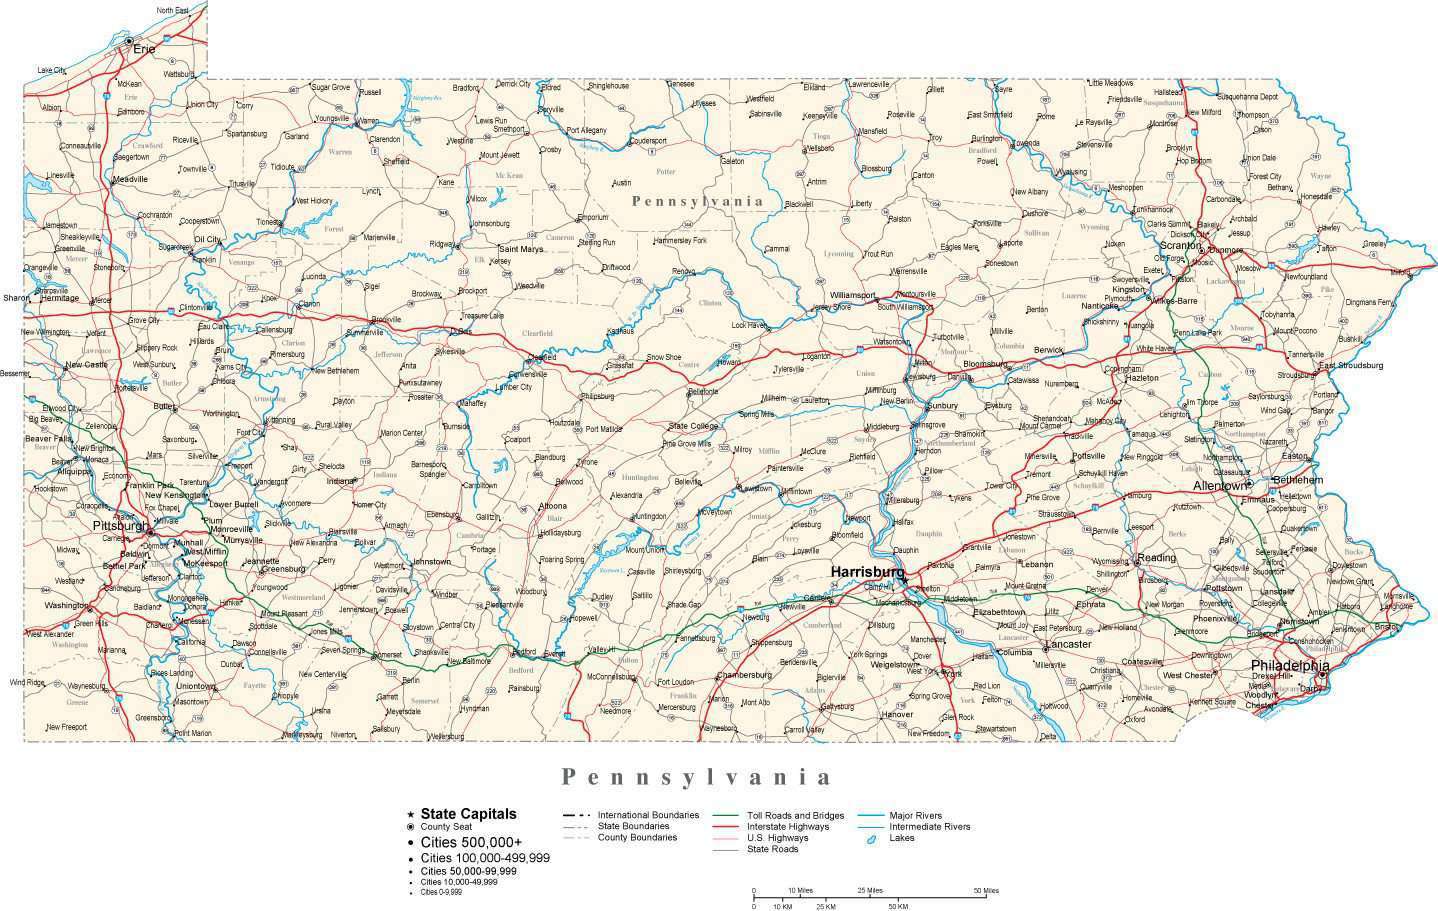 Pennsylvania State Map in Fit-Together Style to match other states